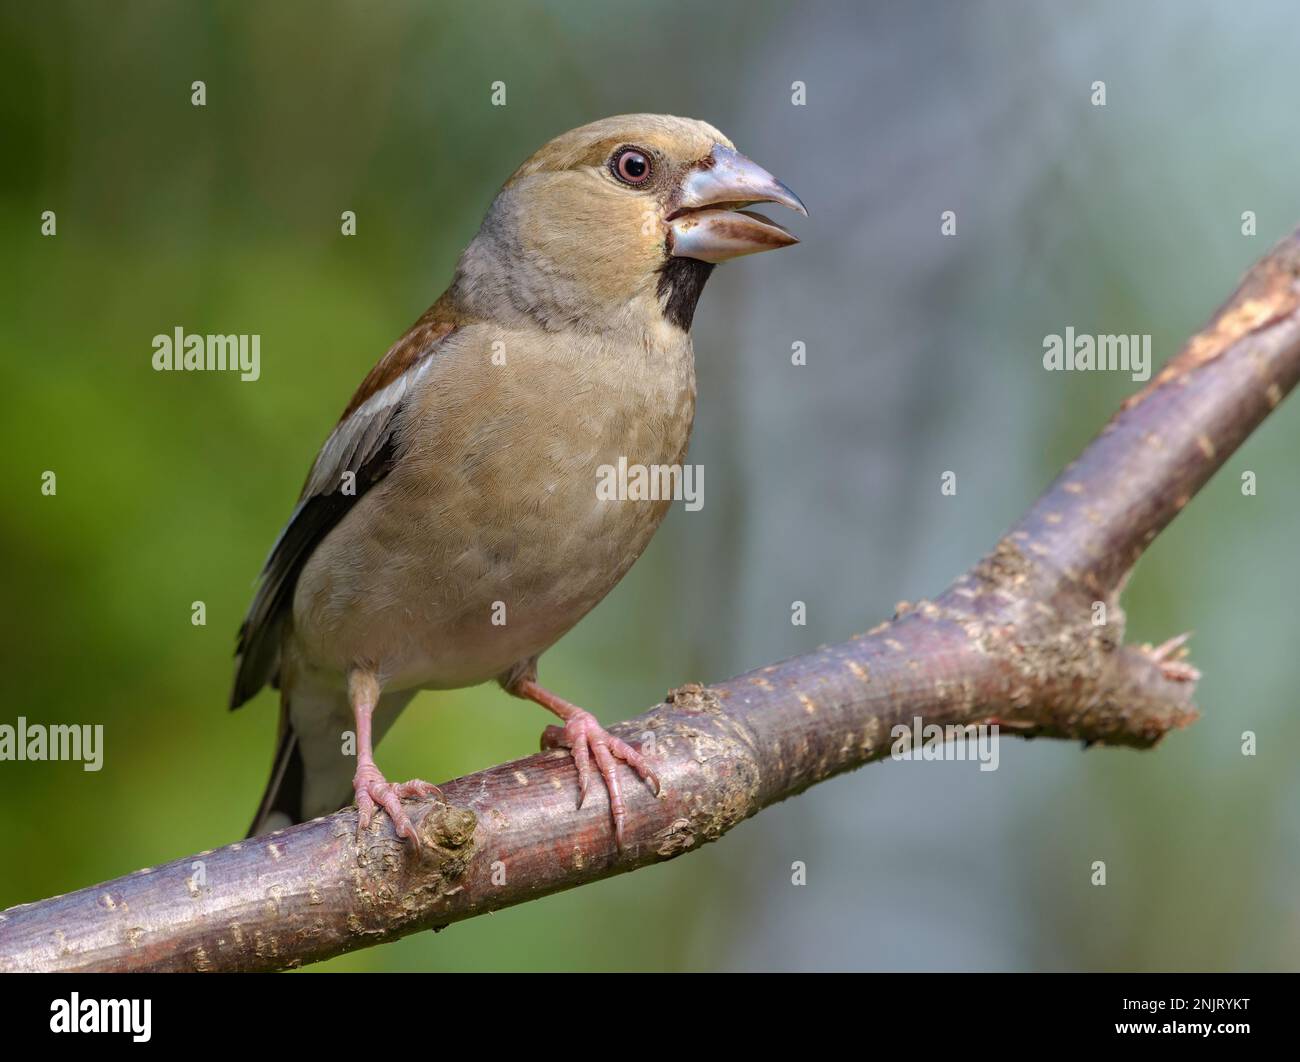 Curious female hawfinch (Coccothraustes coccothraustes) perched with open beak on a small branch in light forest Stock Photo